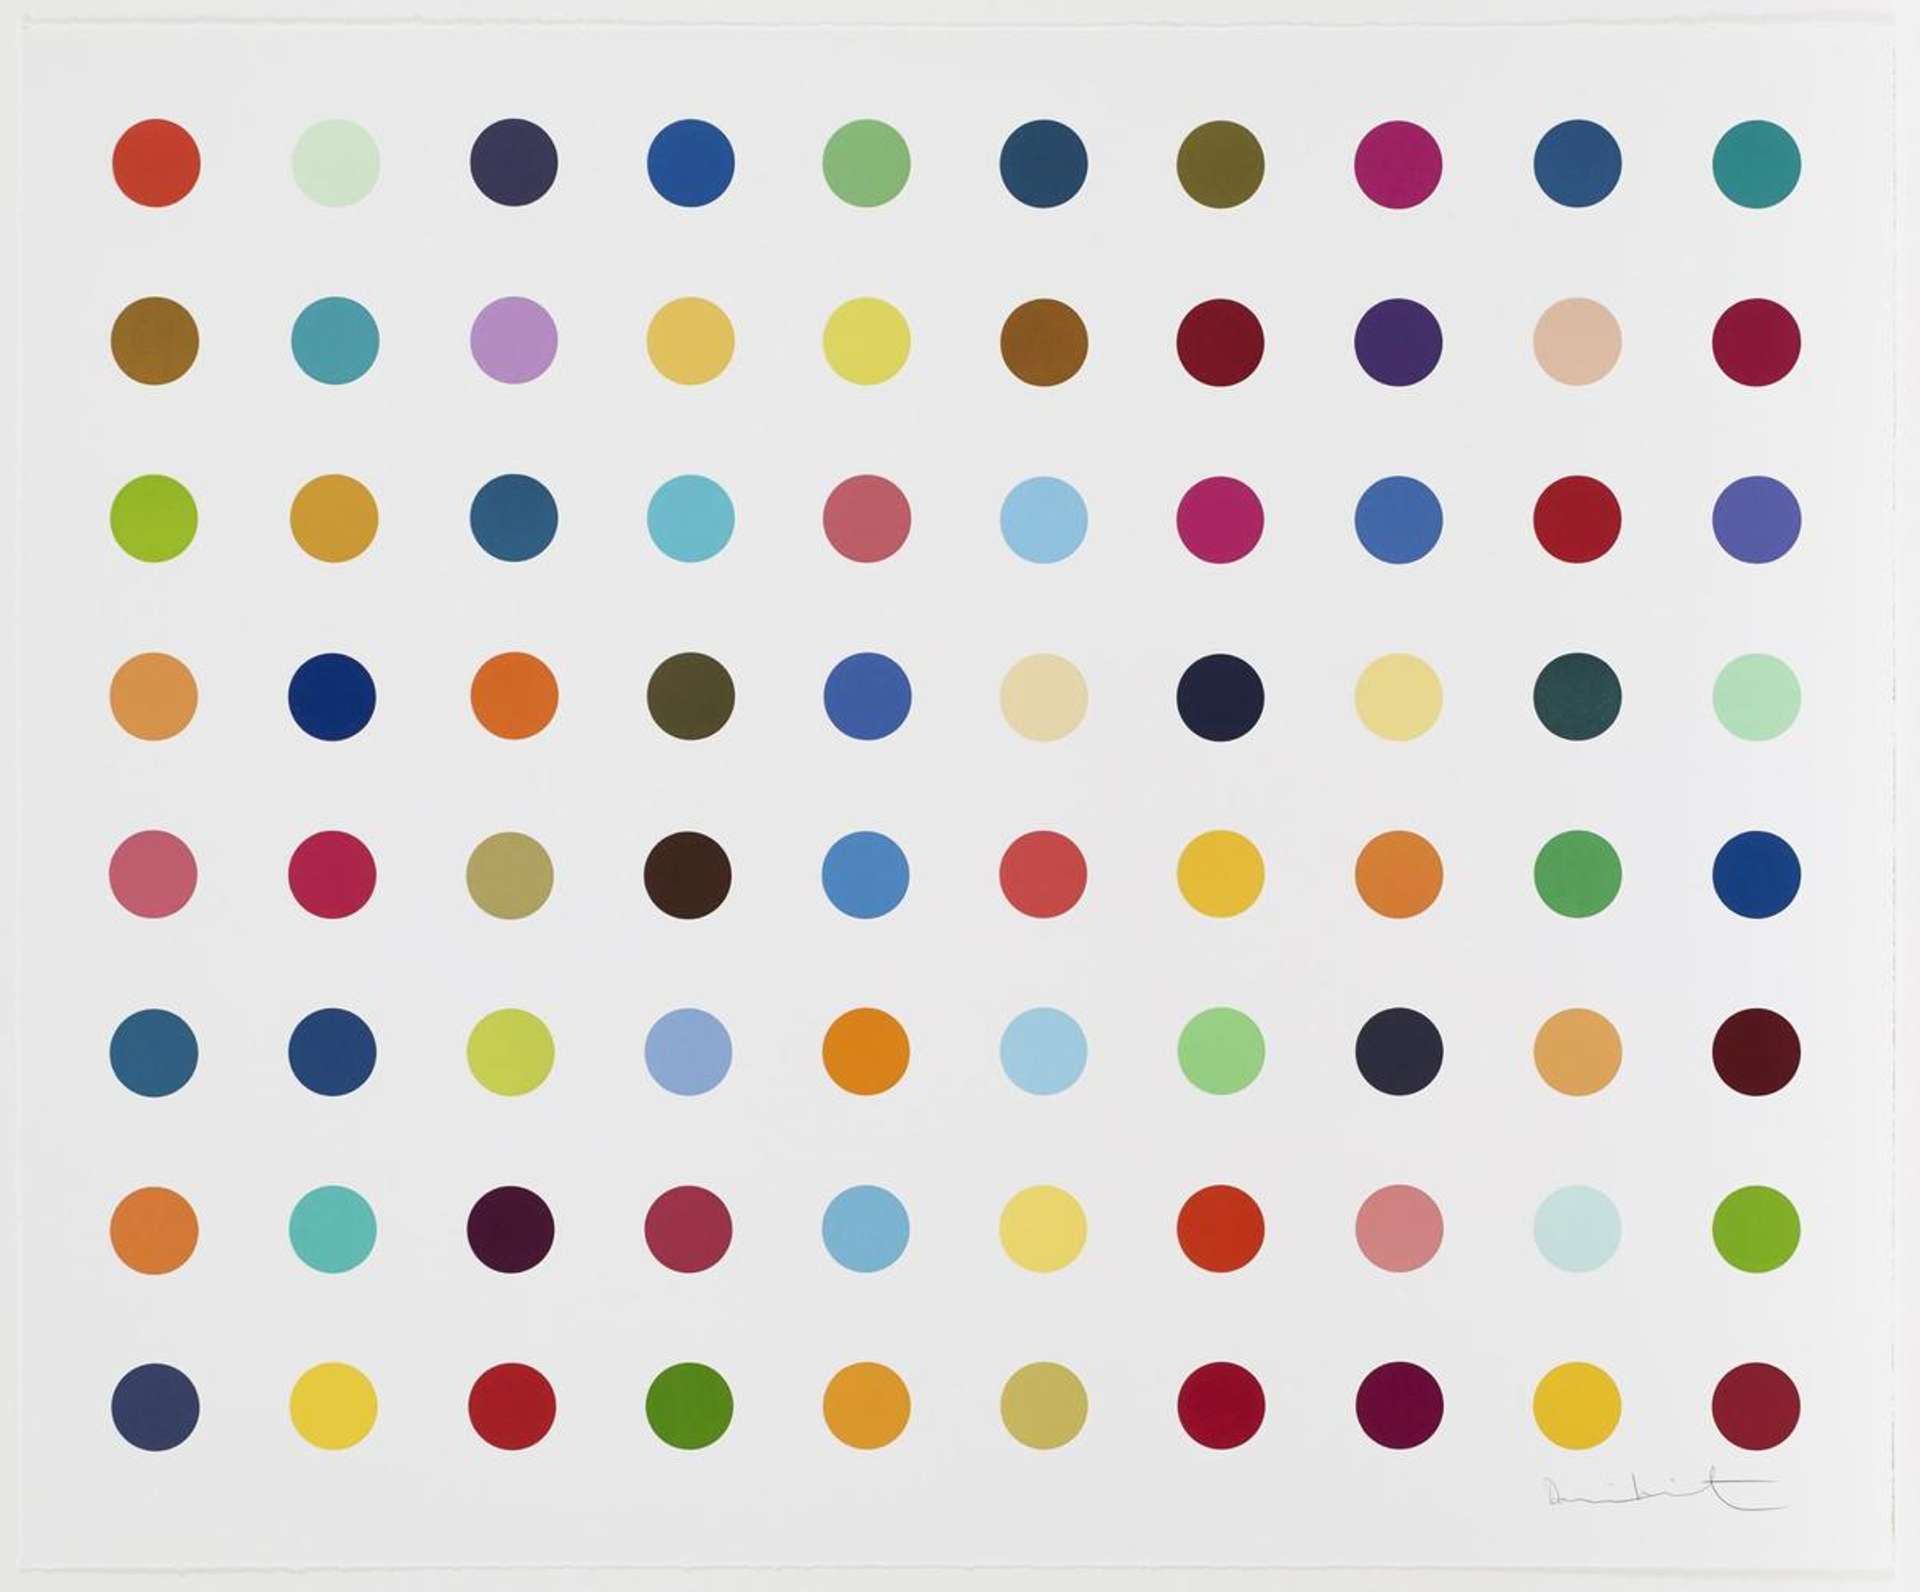 Damien Hirst's Spot Paintings: The Appeal of Endlessness